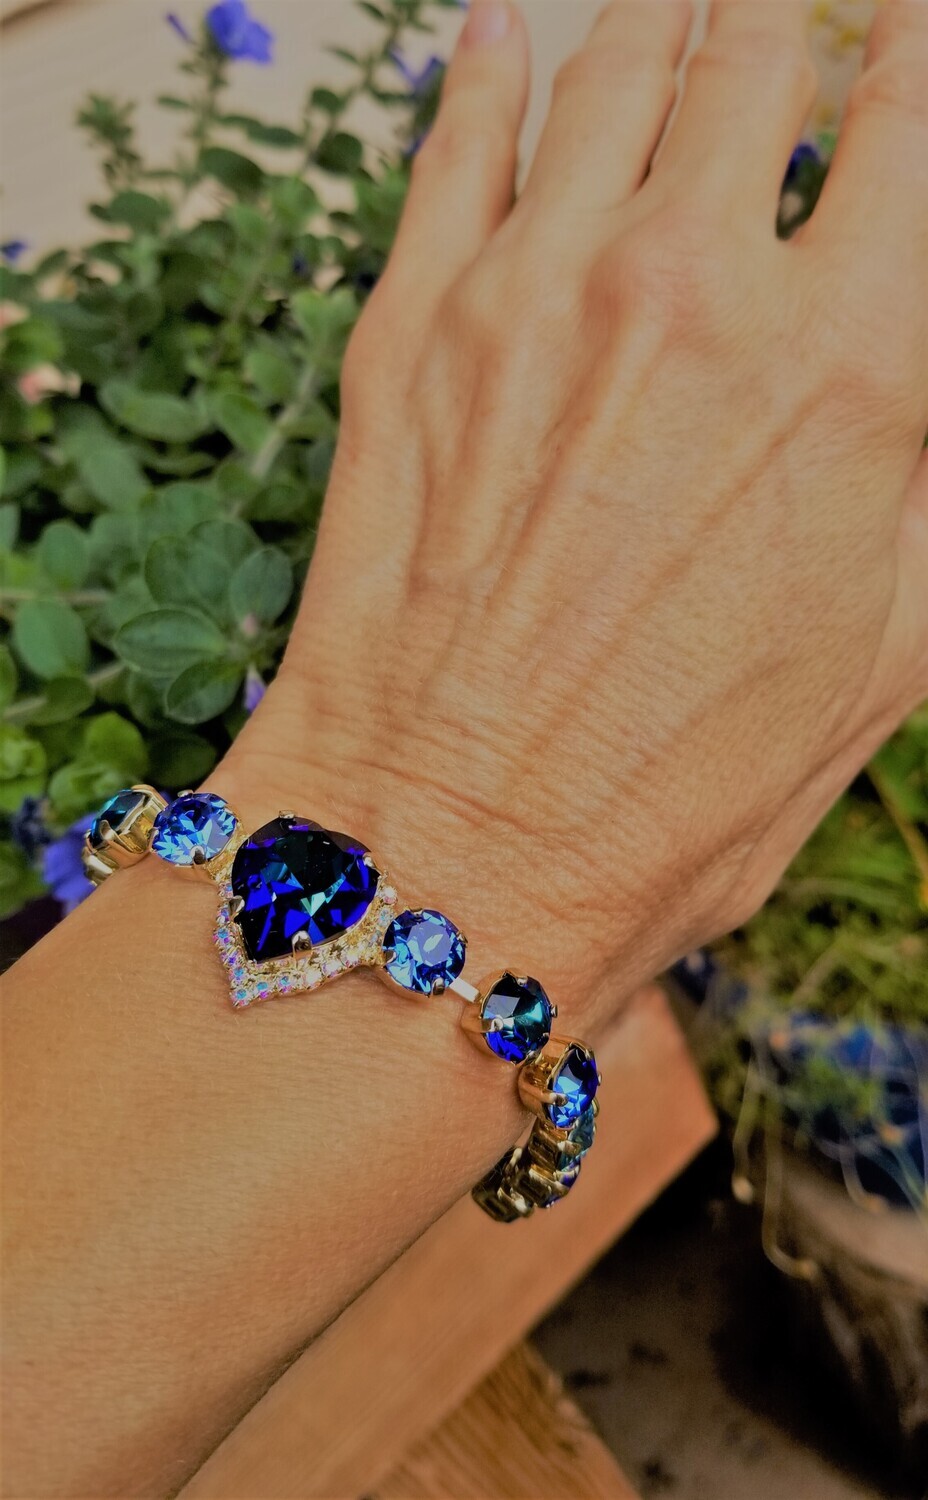 Stunning Rose Gold Gorgeous Heart of the Blue Ray/Devic Crystal LOVE Bracelet $188/$288 Retreat Sale